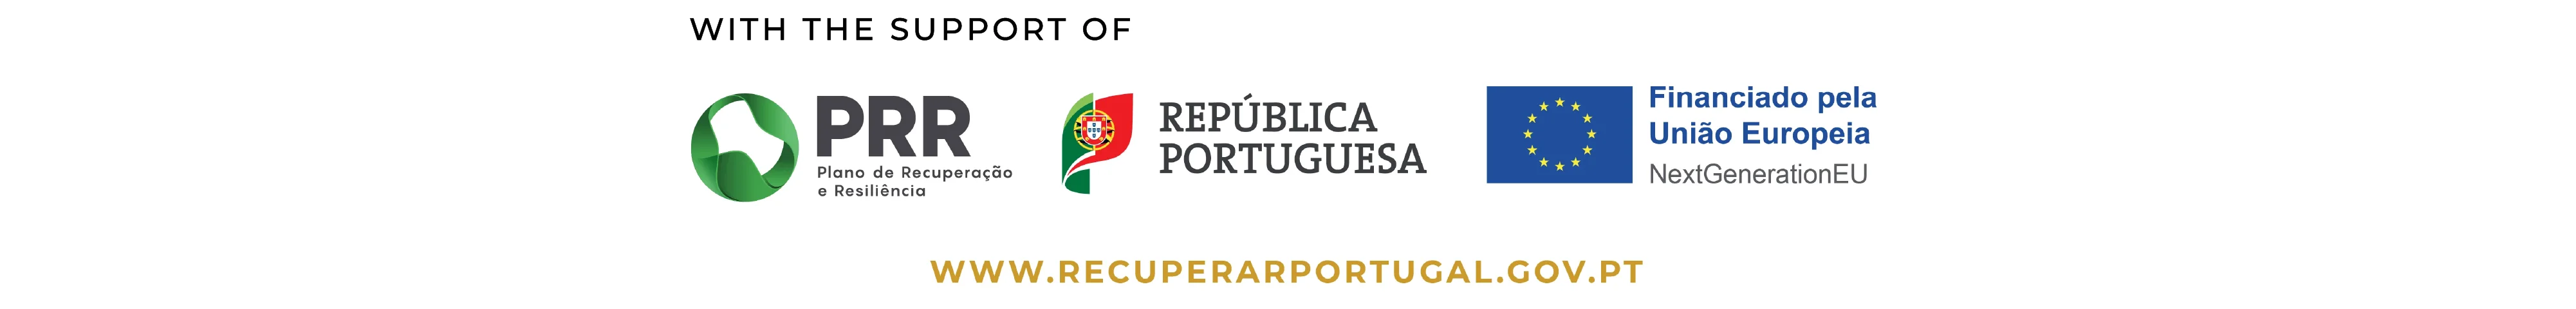 PRR logos: Recovery and Resilience Plan, Portuguese Republic and financed by the European Union | Next Generation EU